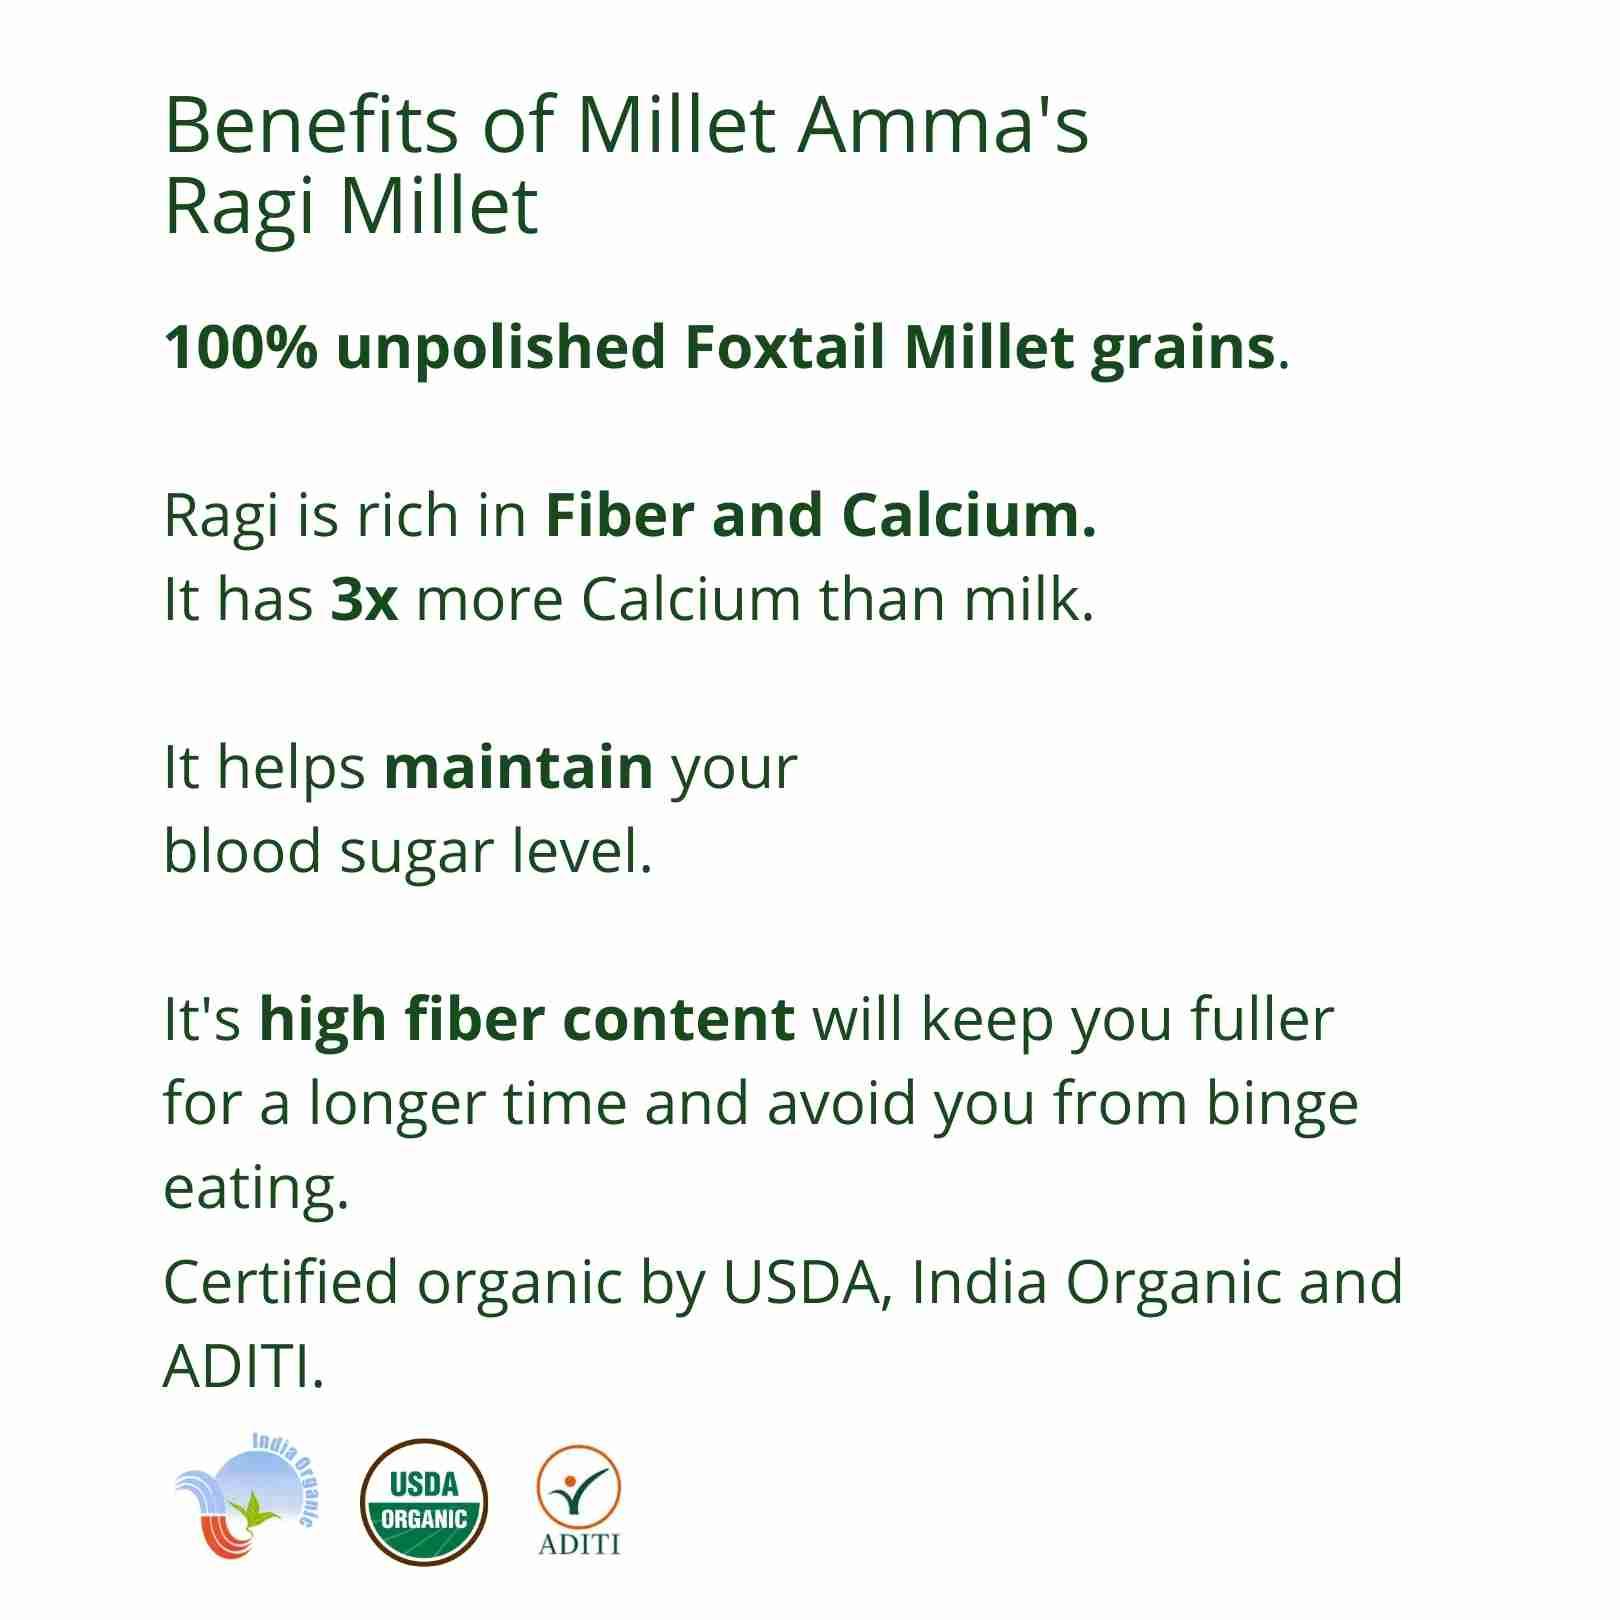 Millet Amma’s Organic Ragi Millet- Our organic Ragi Millet is rich in calcium, fiber, minerals and amino acids. Unpolished Ragi Millet, is a high source of Calcium- it contains over 3 times more calcium than milk.  Ragi Millet is an ideal option for people trying to control their intense glucose levels. It is also loaded with antioxidants making it a natural relaxant. Ragi helps you feel full for longer, has a low glycemic index and is good for regulating your sugar levels.